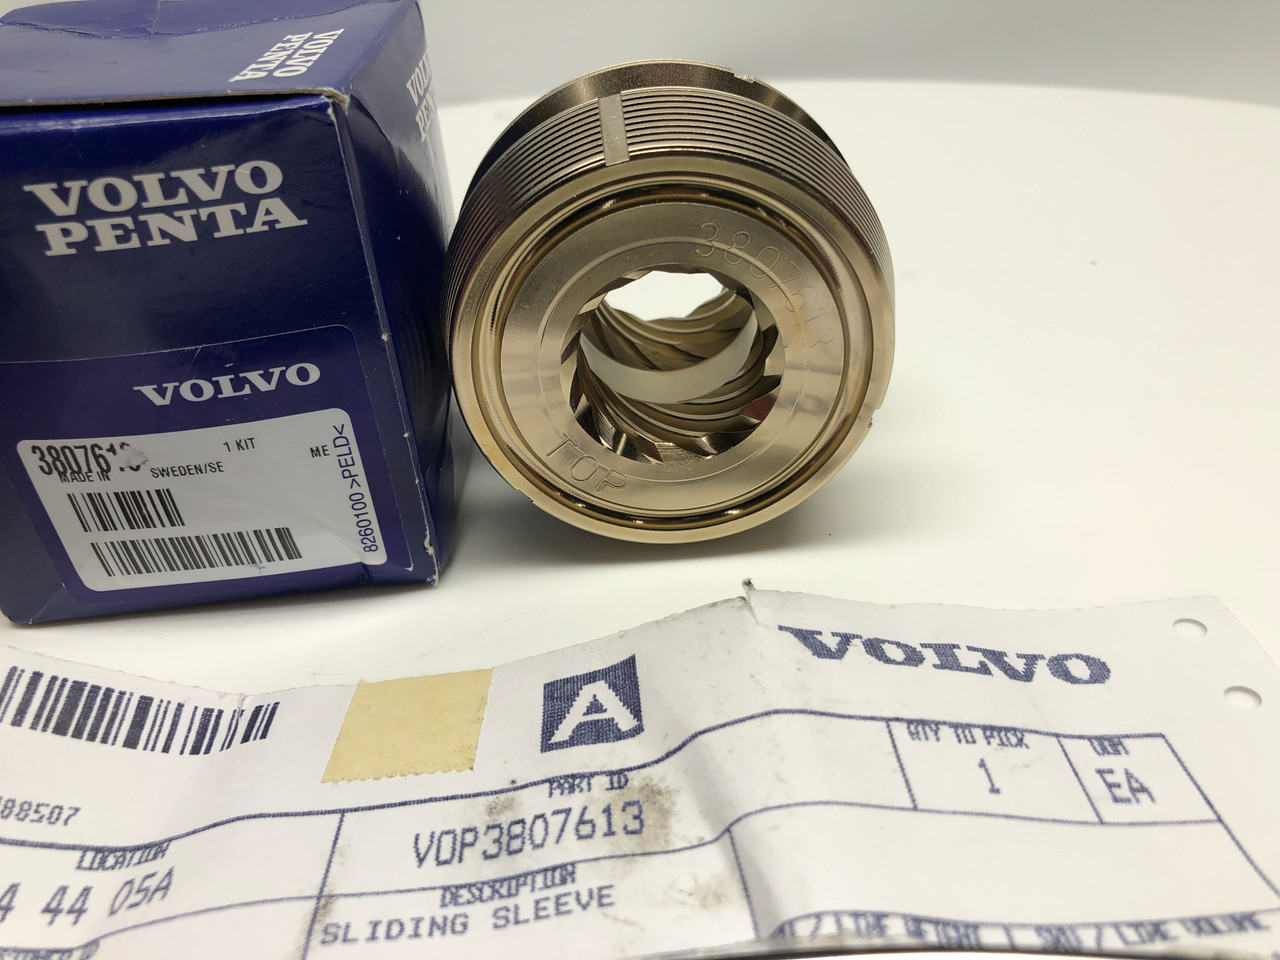 $399.88* GENUINE VOLVO no tax* <p>SLIDING SLEEVE</p> 3807613 *Special Order 10 To 14 Days For Delivery